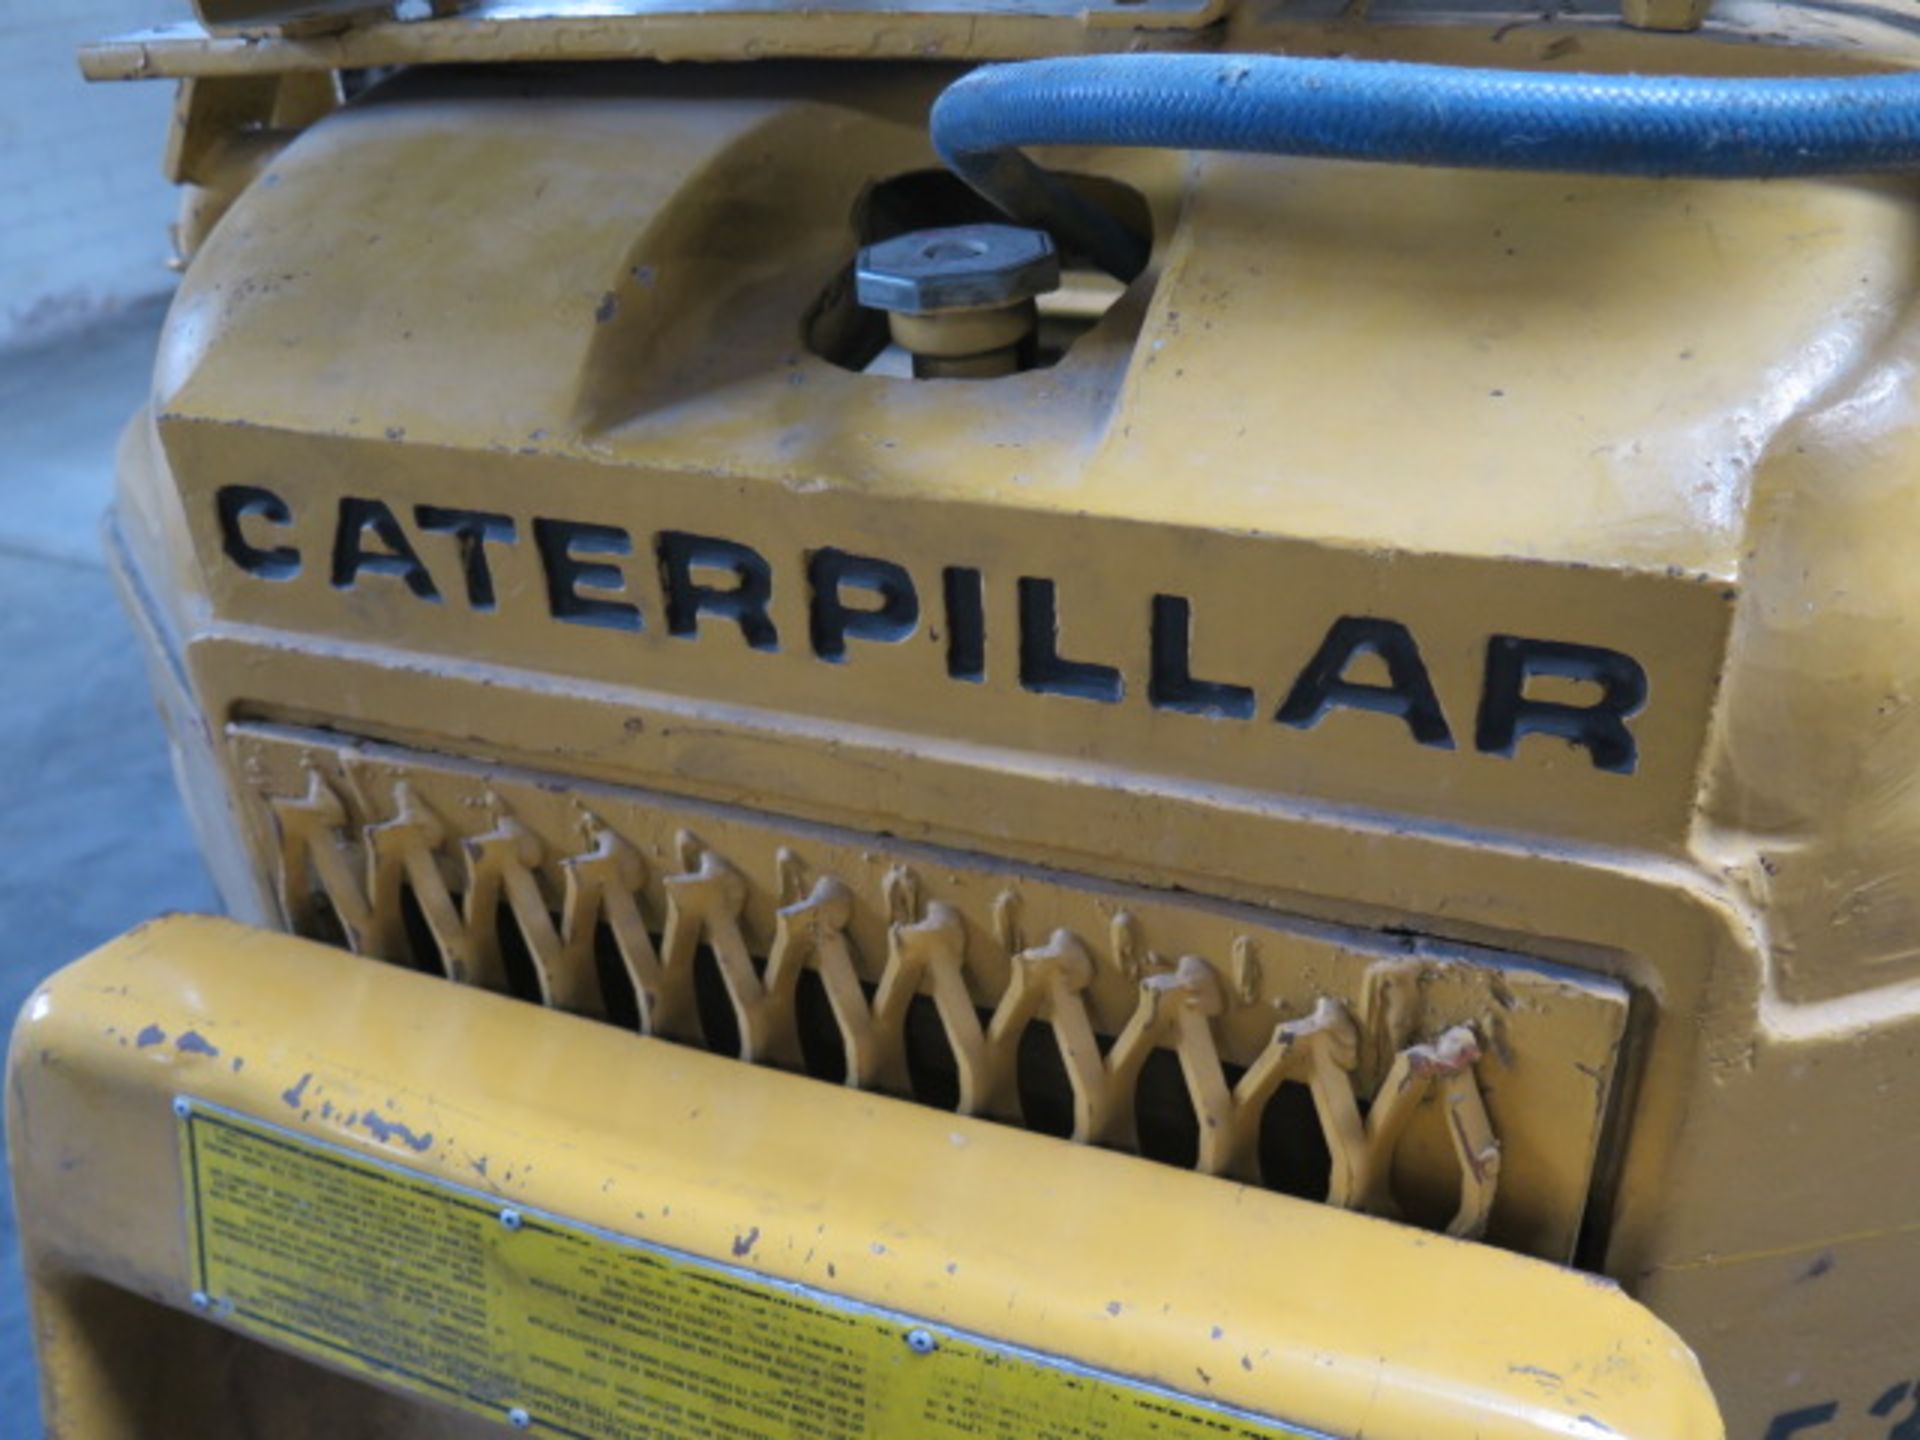 Caterpillar mdl. TC-30 2000 Lb Cap LPG Forklift s/n 61V0272 w/ 3-Stage Mast, 189” Lift Height, - Image 4 of 10